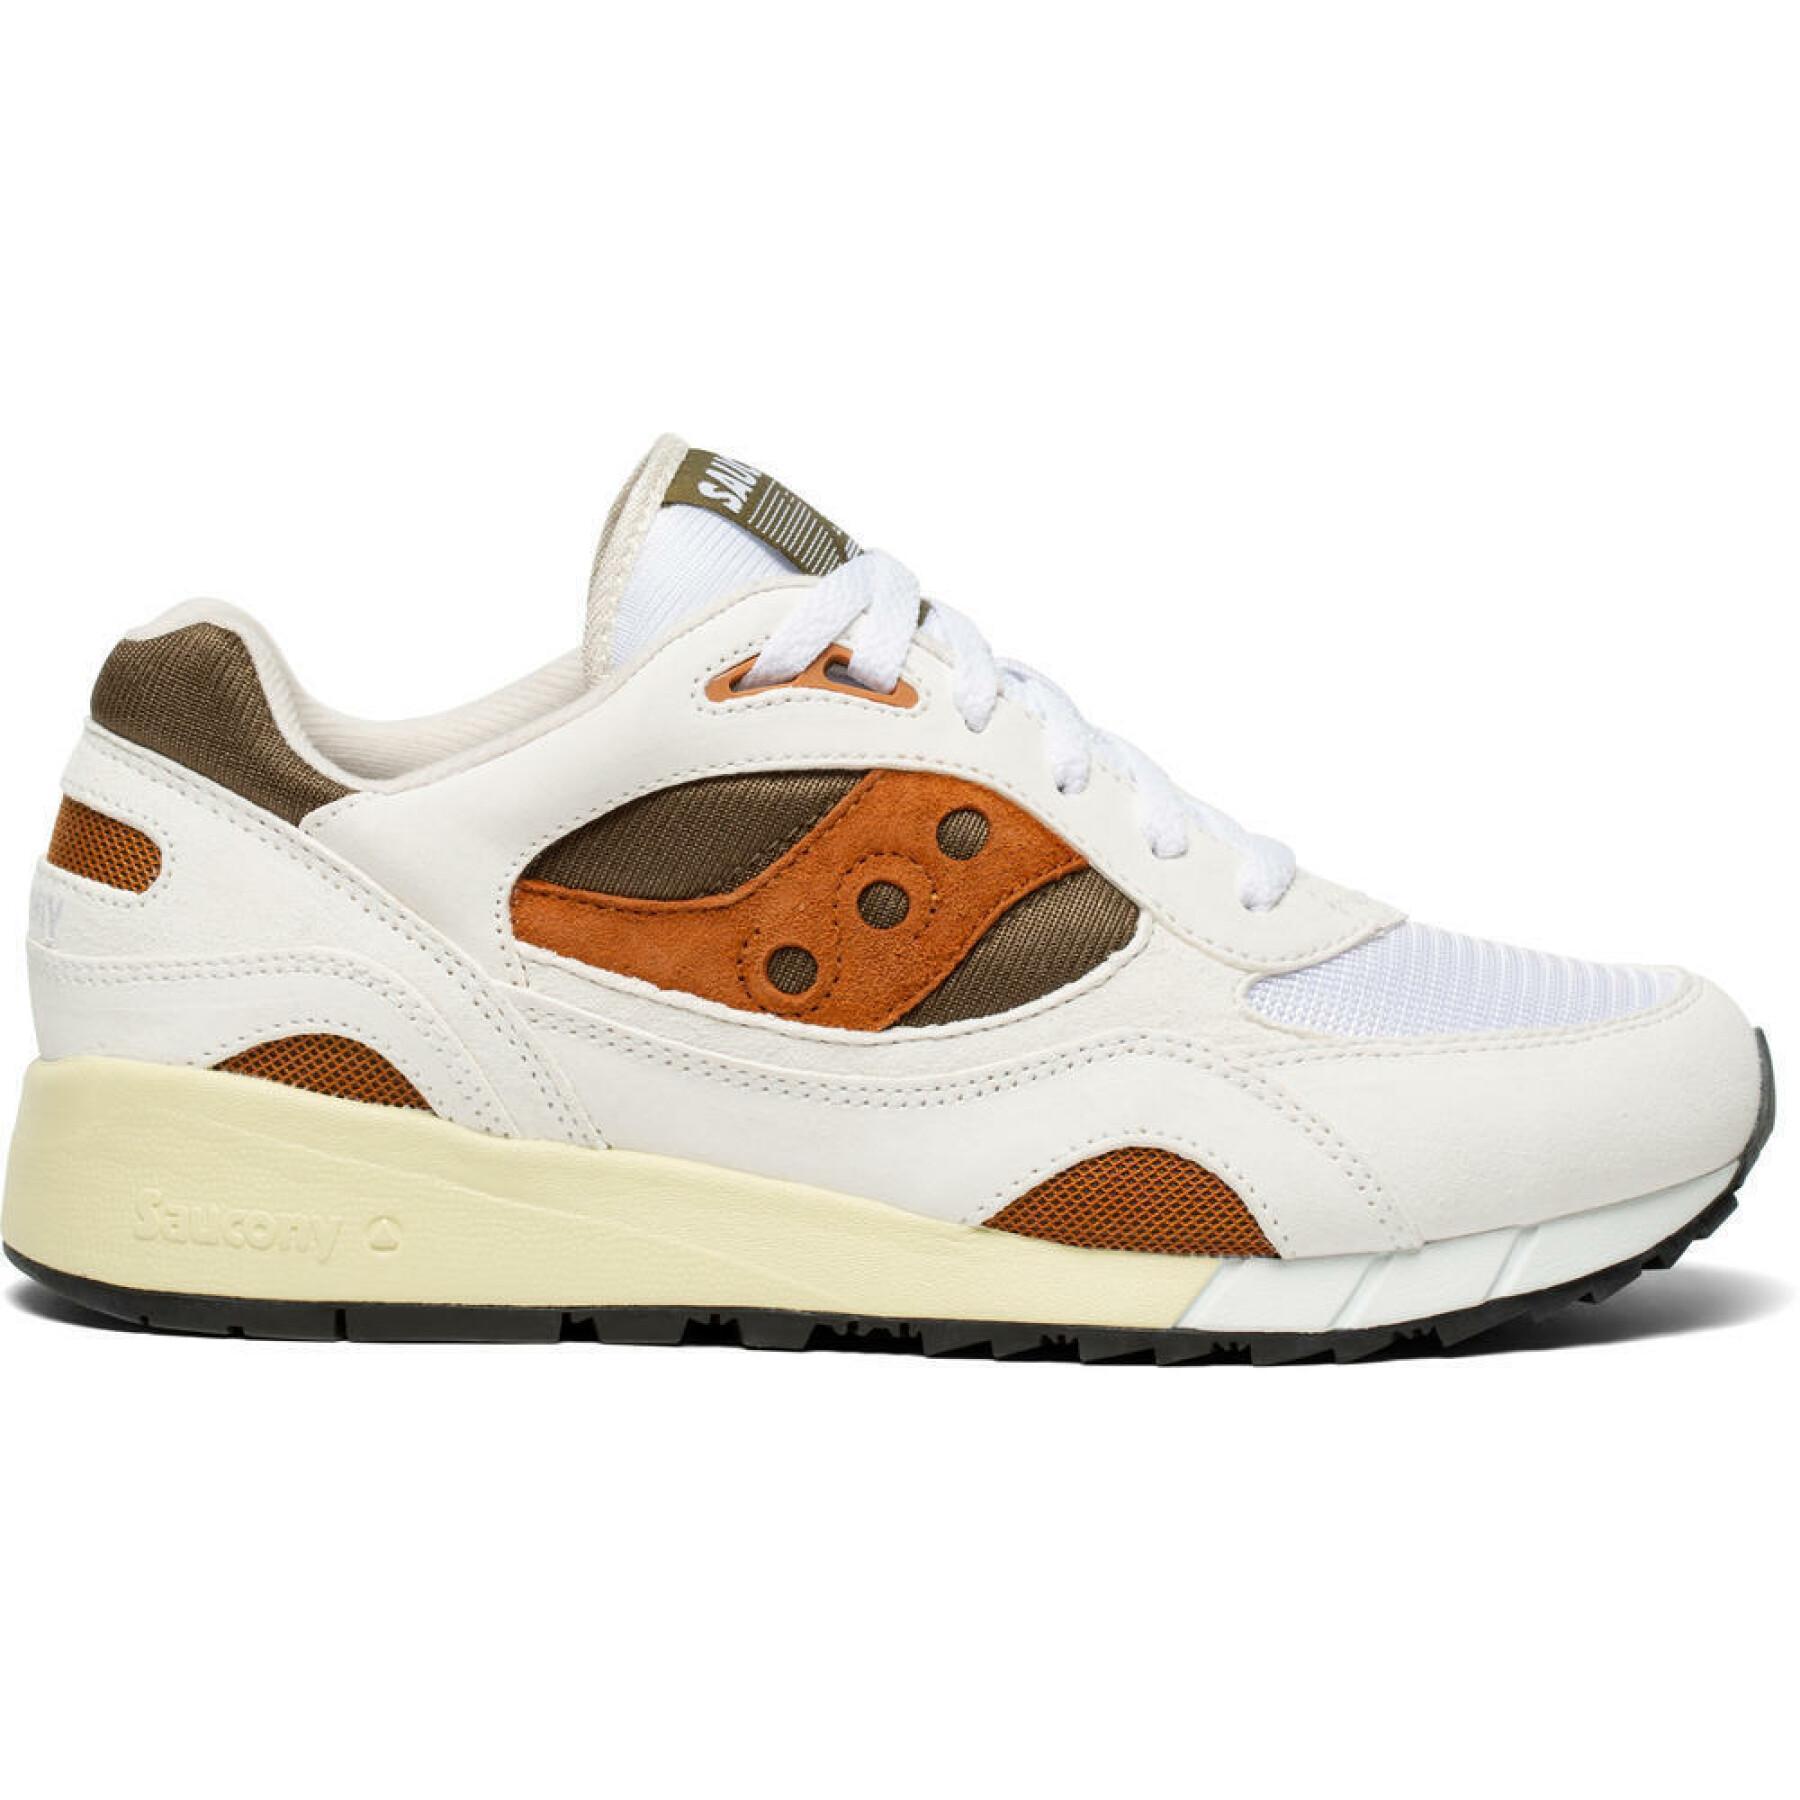 Trainers Saucony shadow 6000